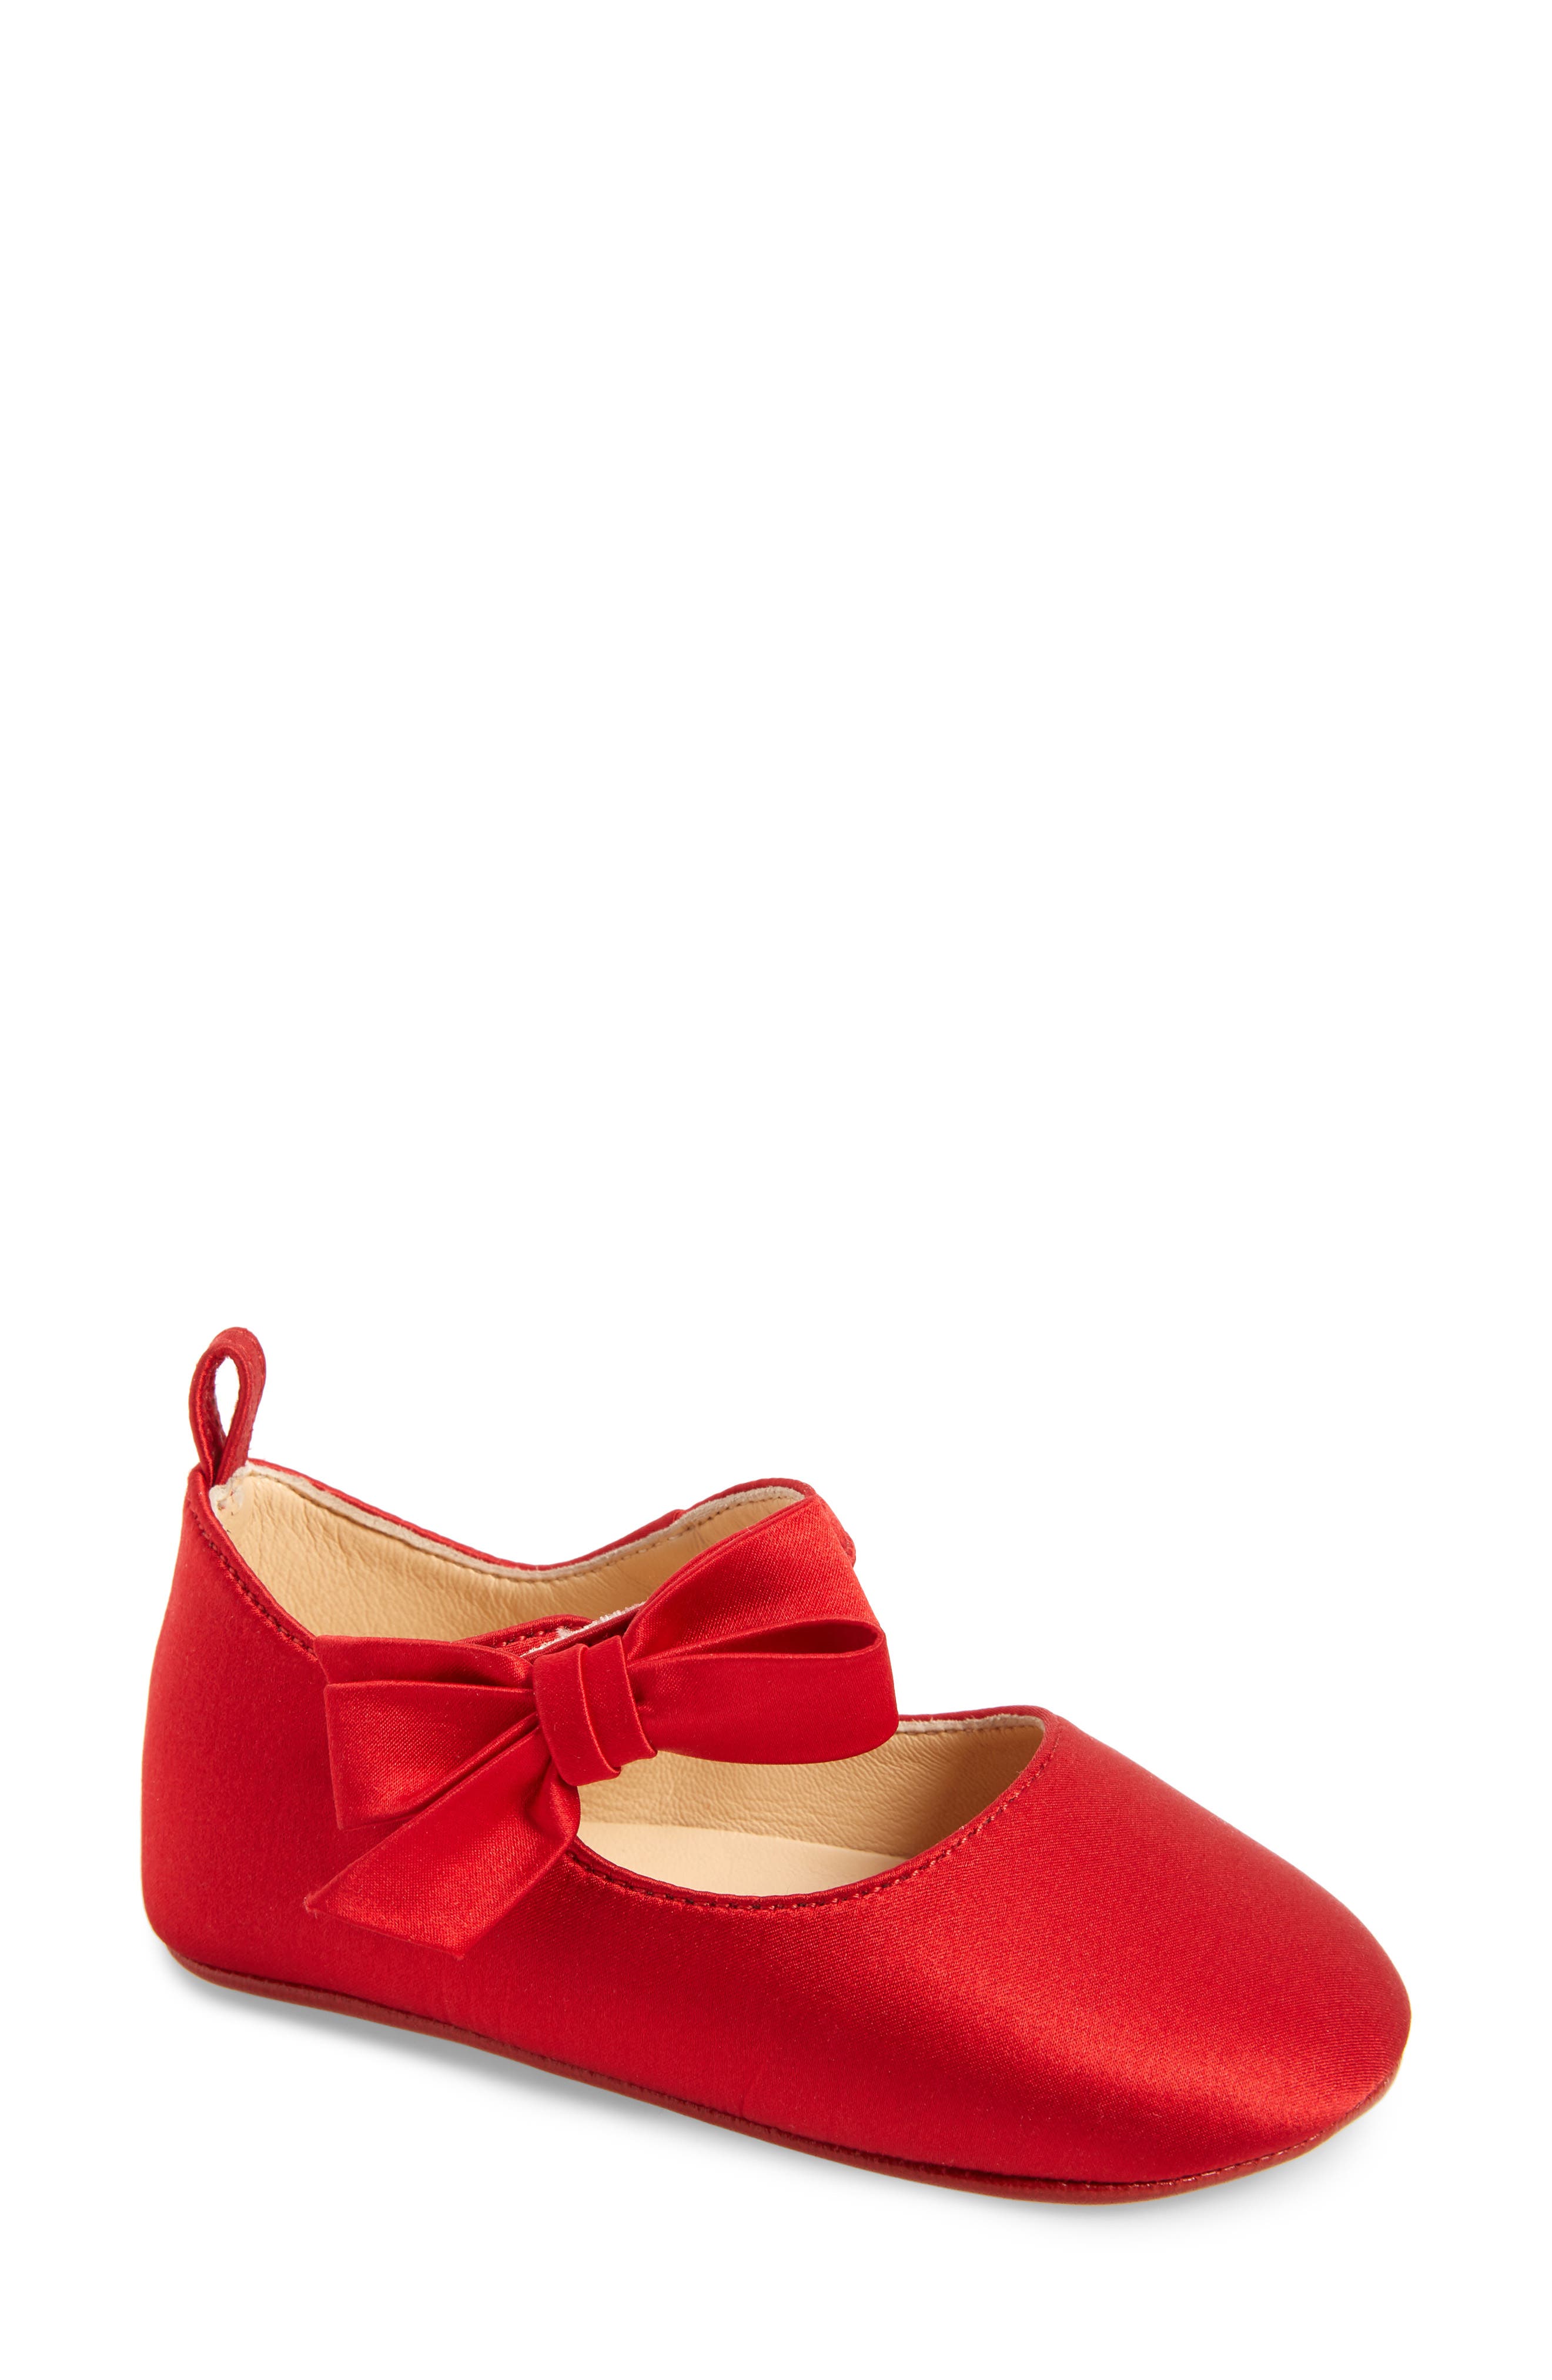 mary jane red bottom shoes